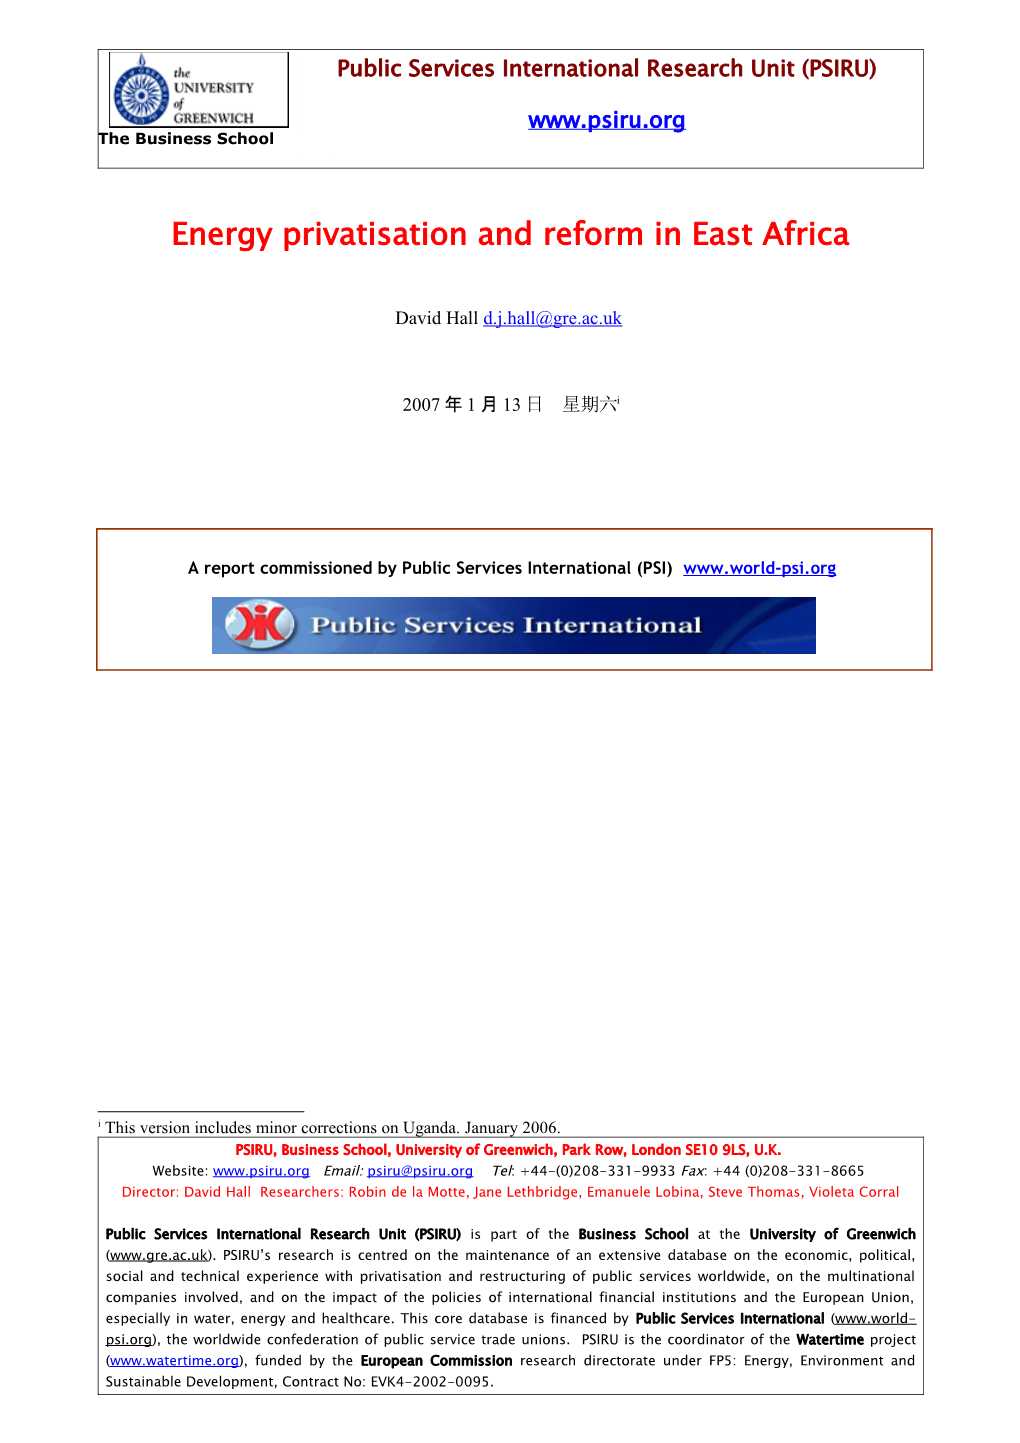 Energy Privatisation and Reform in East Africa